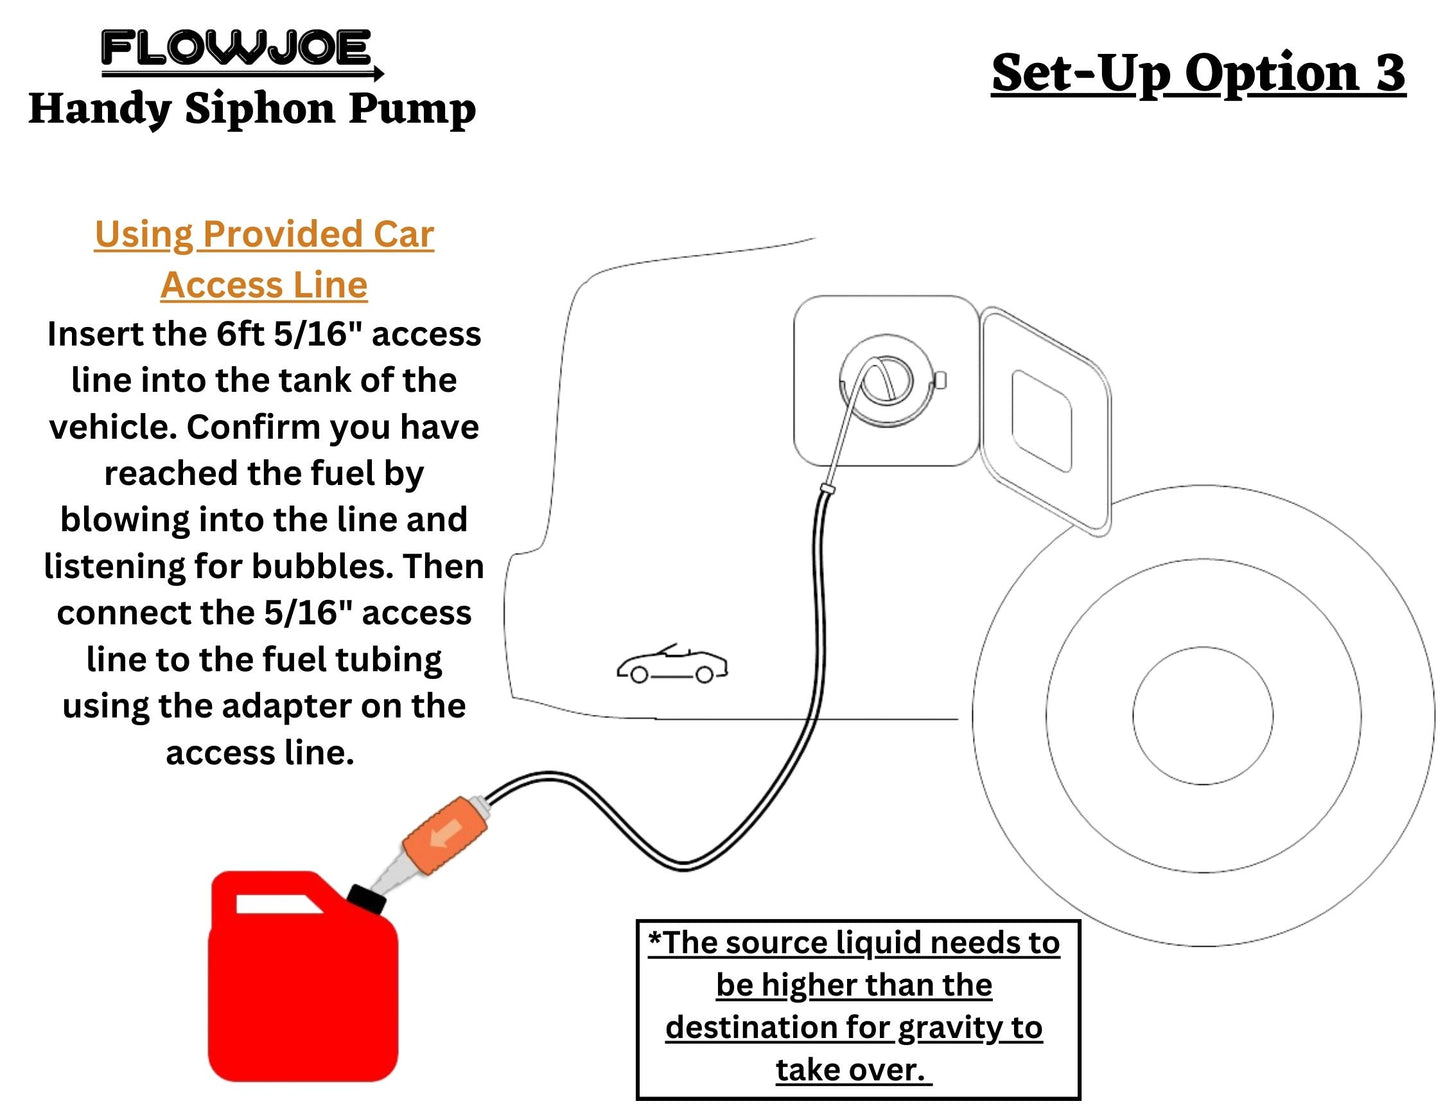 Handy siphon pump set up option 3 using car access line to get into vehicle gas tank 